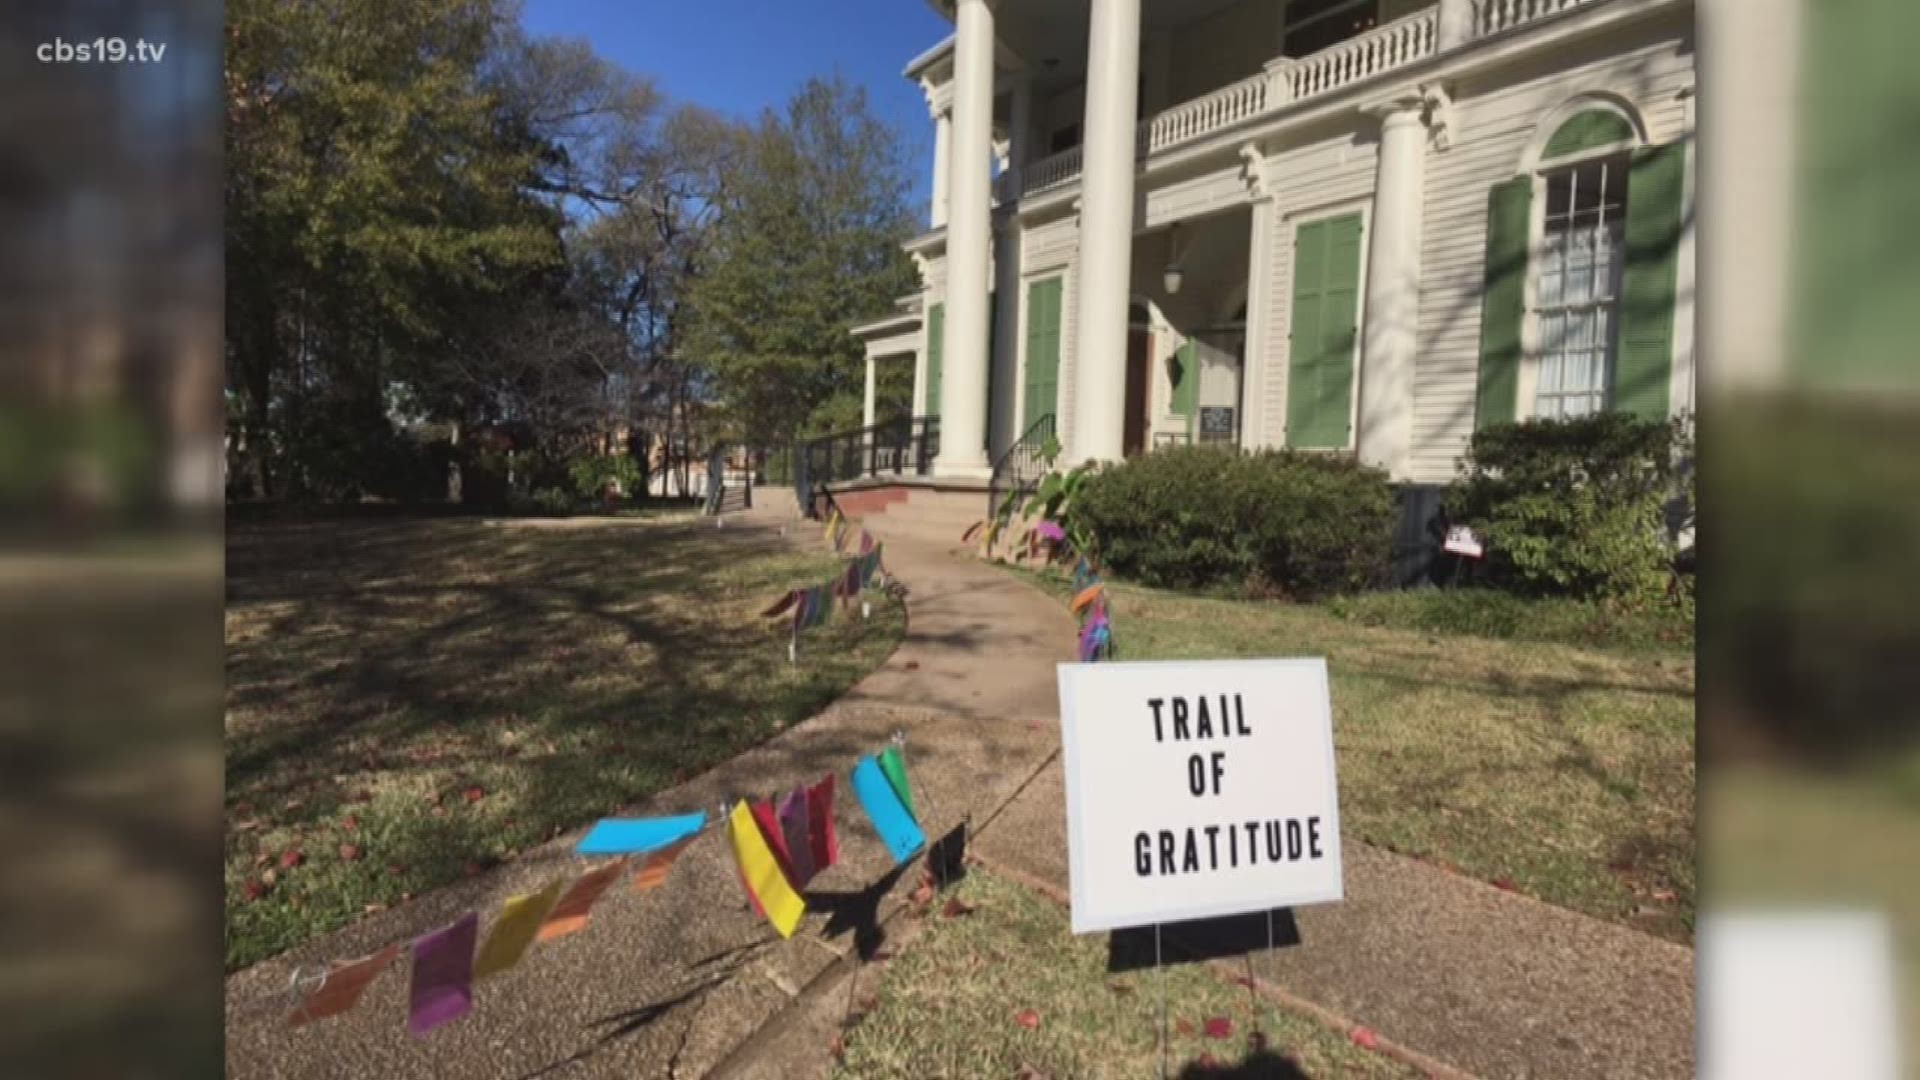 The Trail of Gratitude is currently on display on the grounds of the Goodman Museum through the second week of January 2018